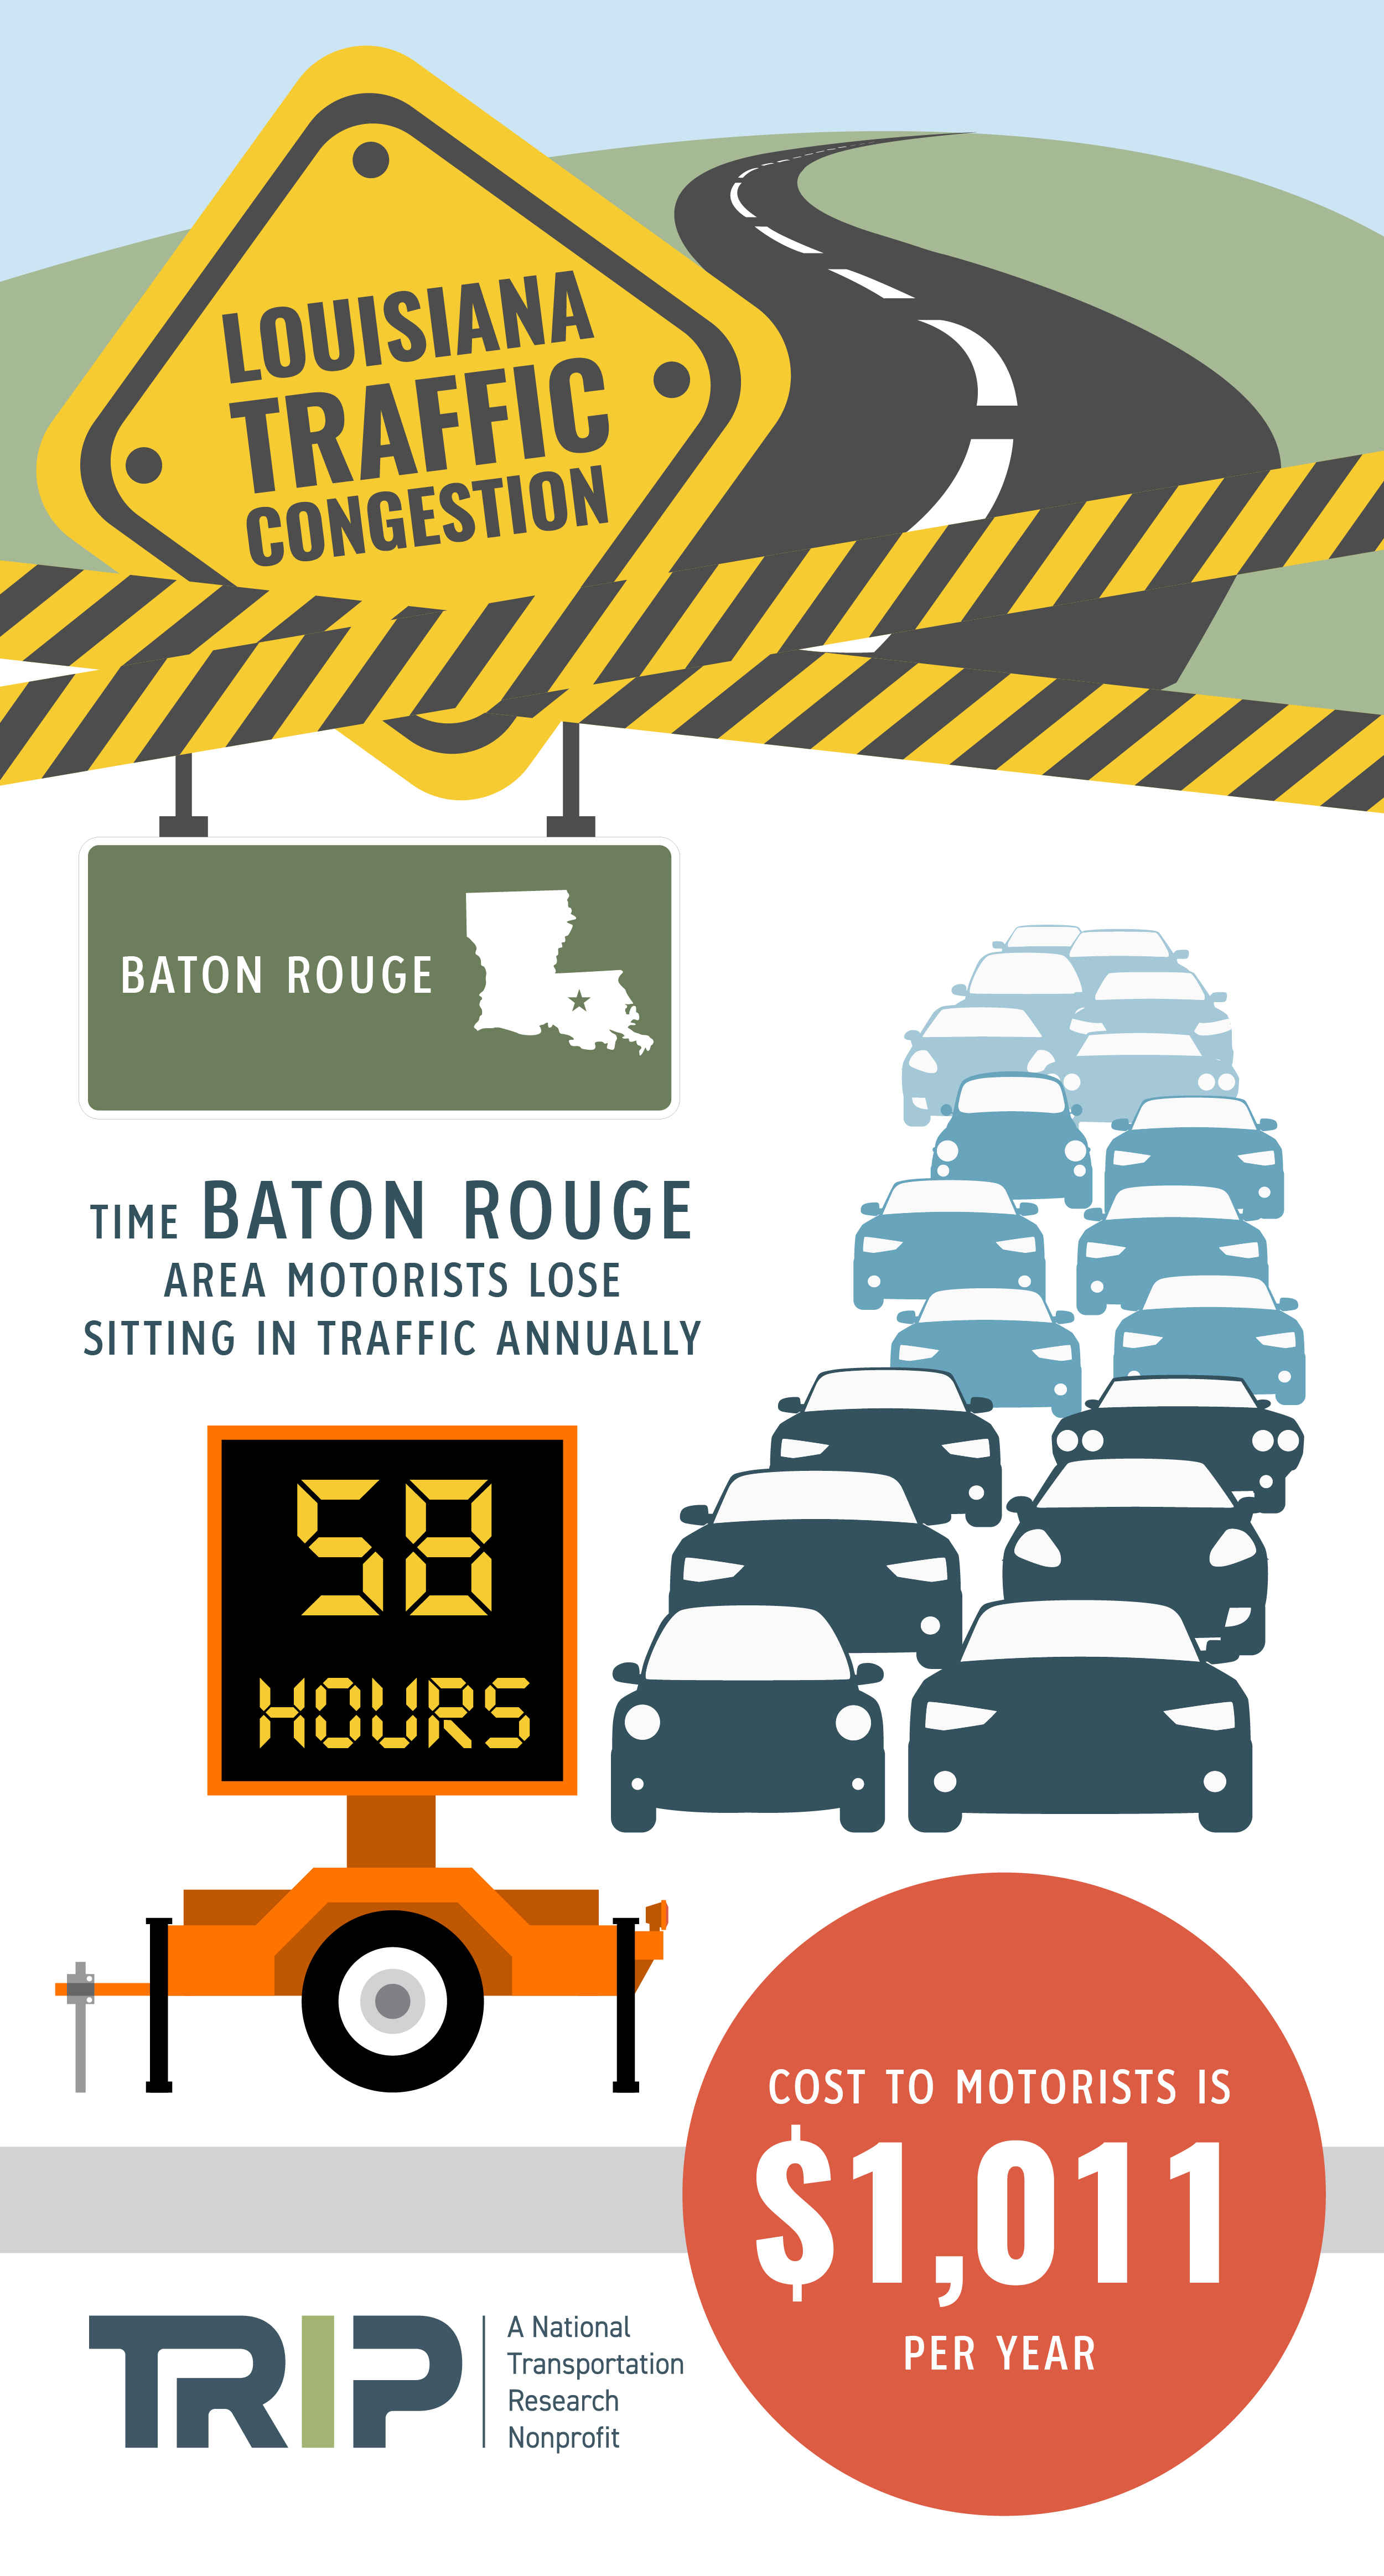 Baton Rouge Traffic Congestion Infographic – October 2019